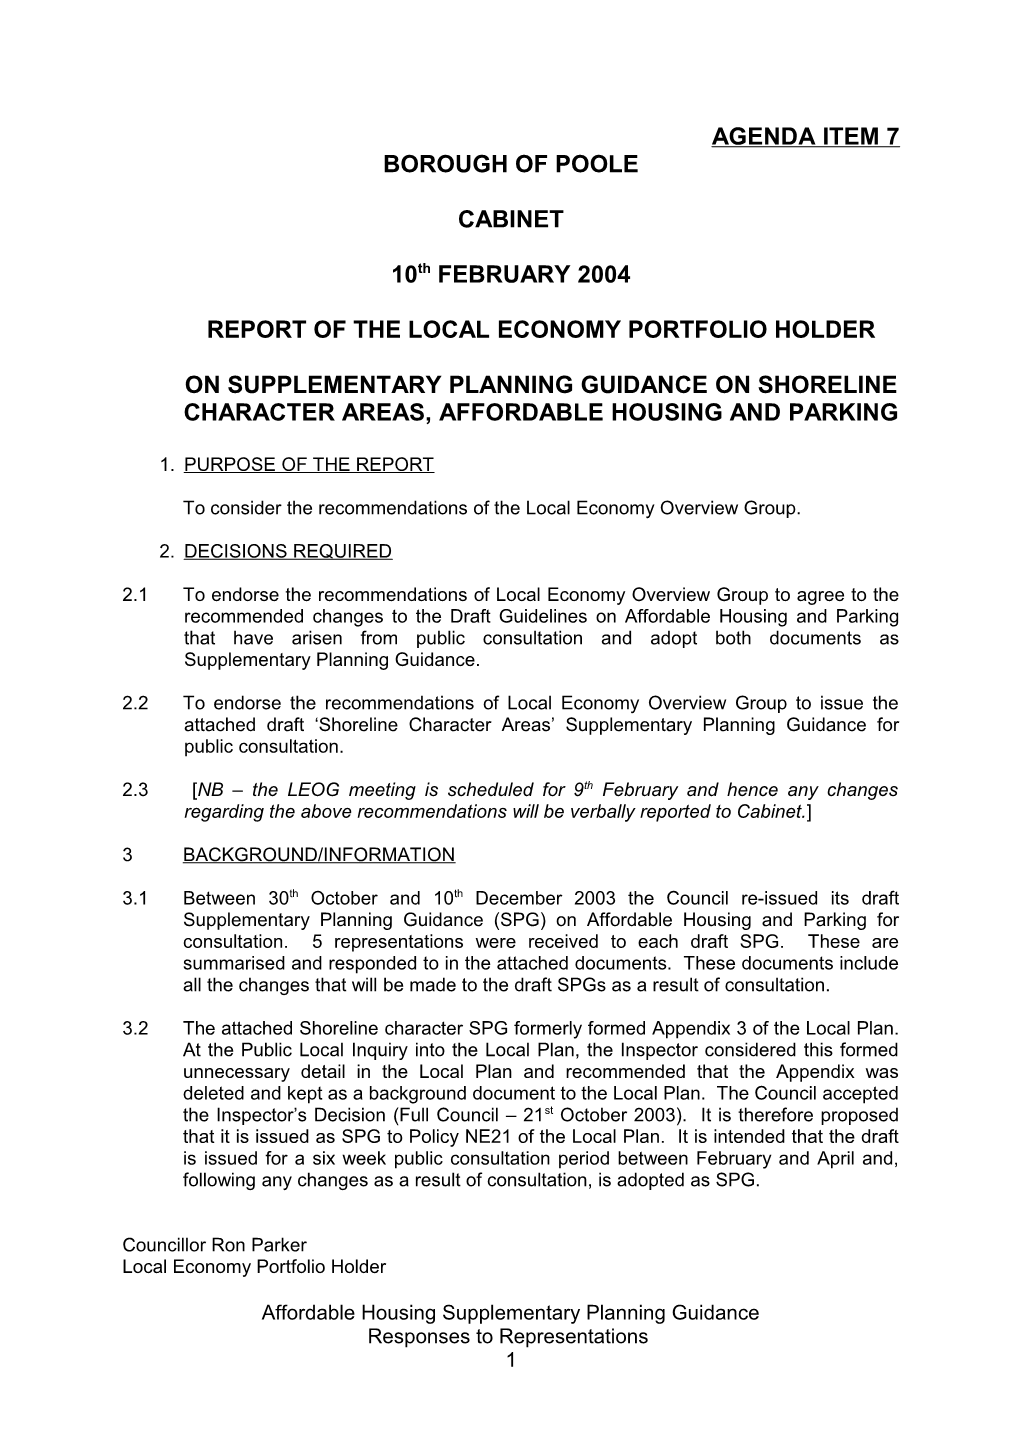 Supplementary Planning Guidance on Shoreline Character Areas, Affordable Housing and Parking